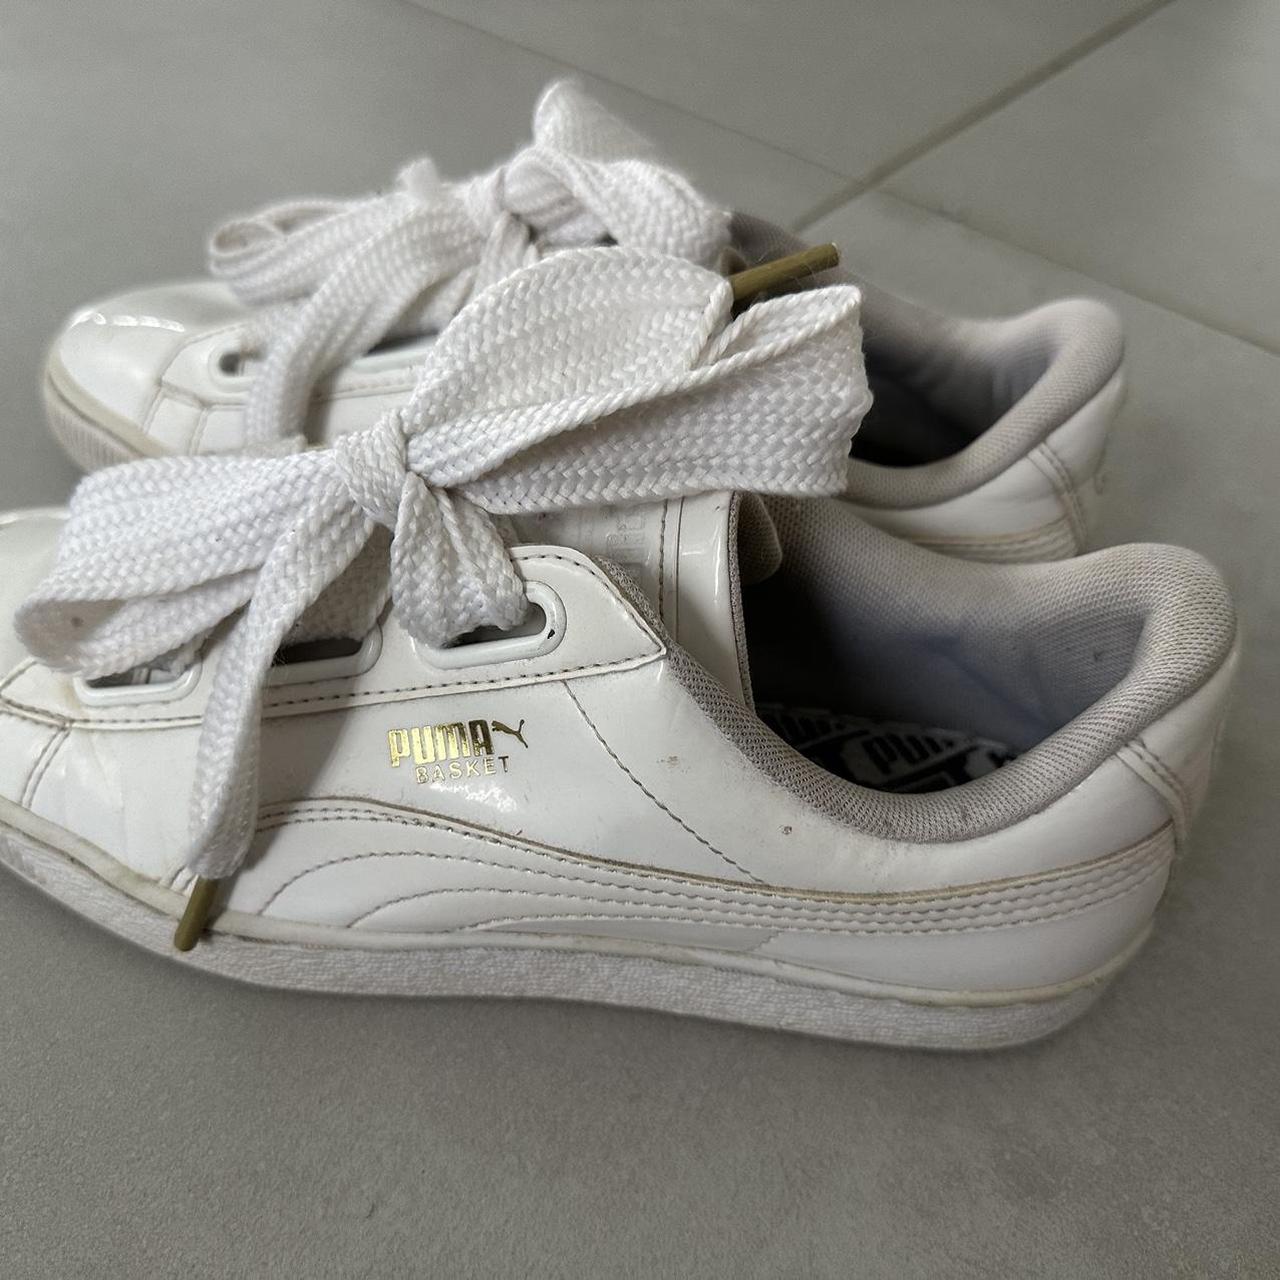 Womens White Puma Shoes With Material Bow Size Depop 3077